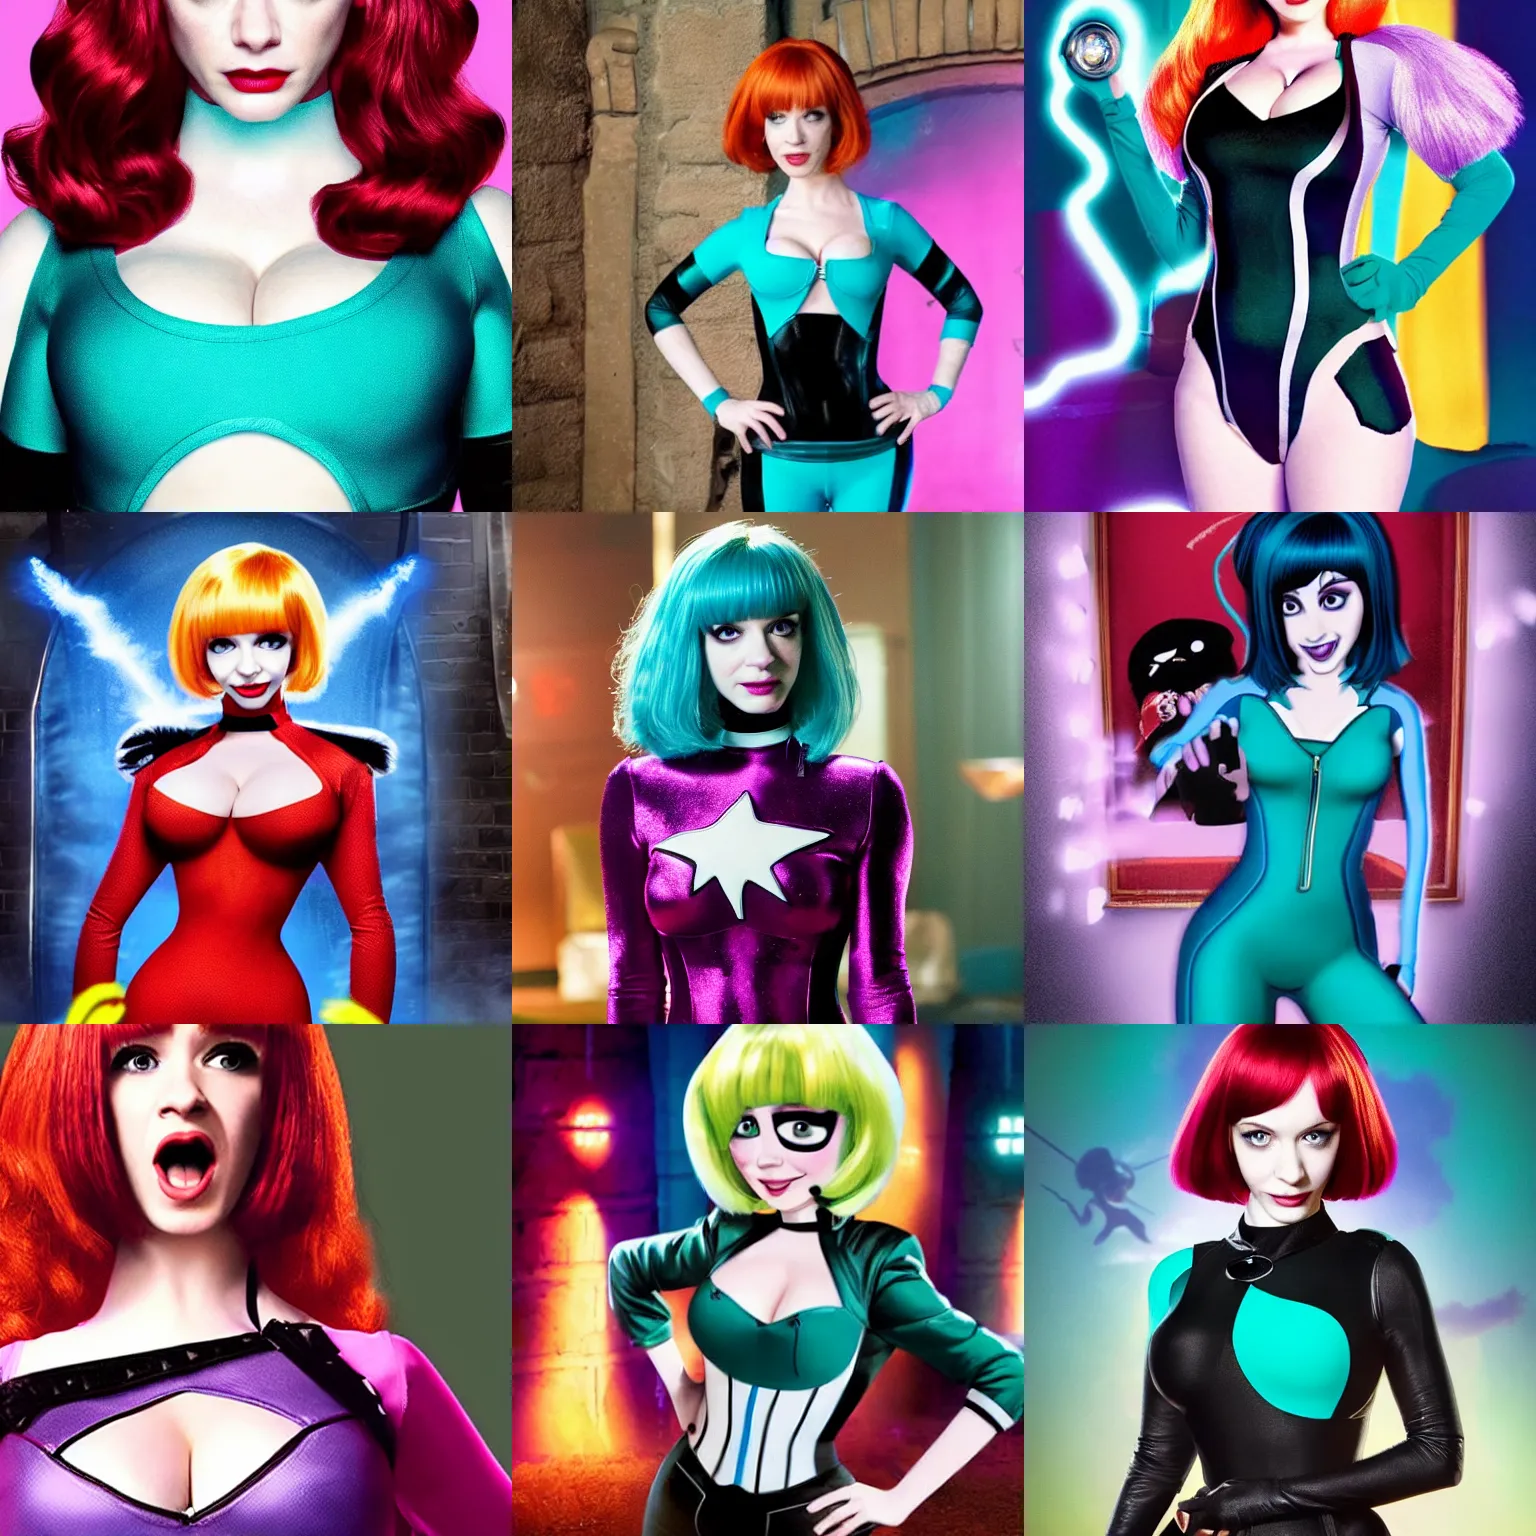 Prompt: a cinematic promotional image of christina hendricks as maddie fenton from the live - action netflix adaptation of danny phantom ; she has auburn hair and a bob cut with straight bangs ; she is wearing a heavy - duty protective teal bodysuit with a black neck